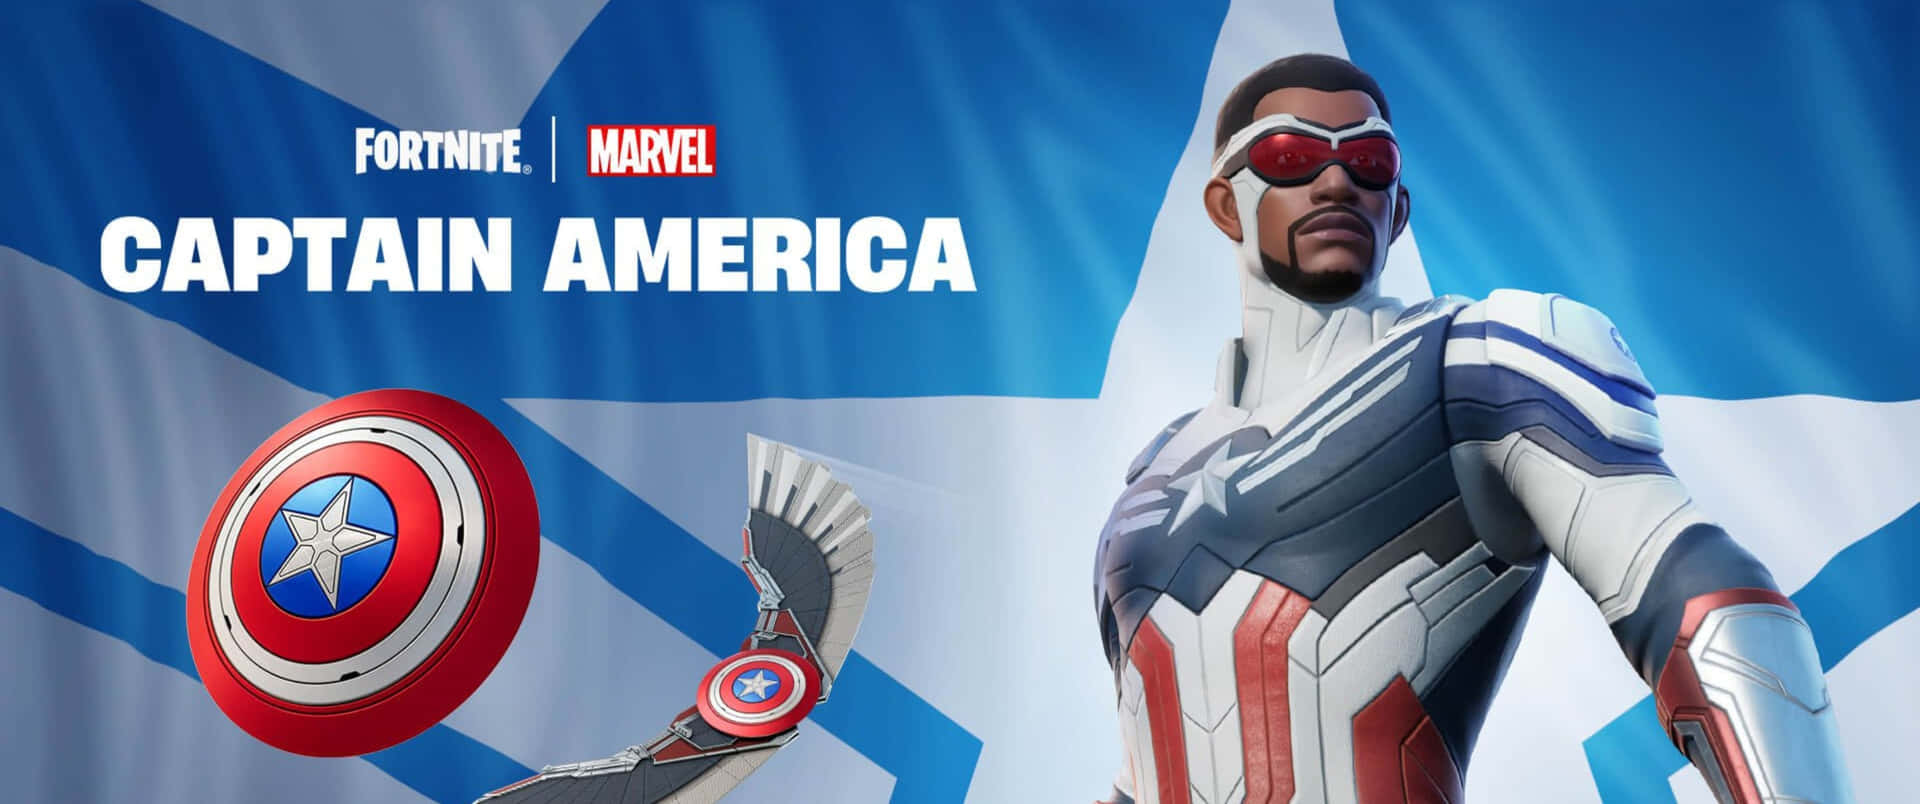 Captain America stands ready to defend truth and justice